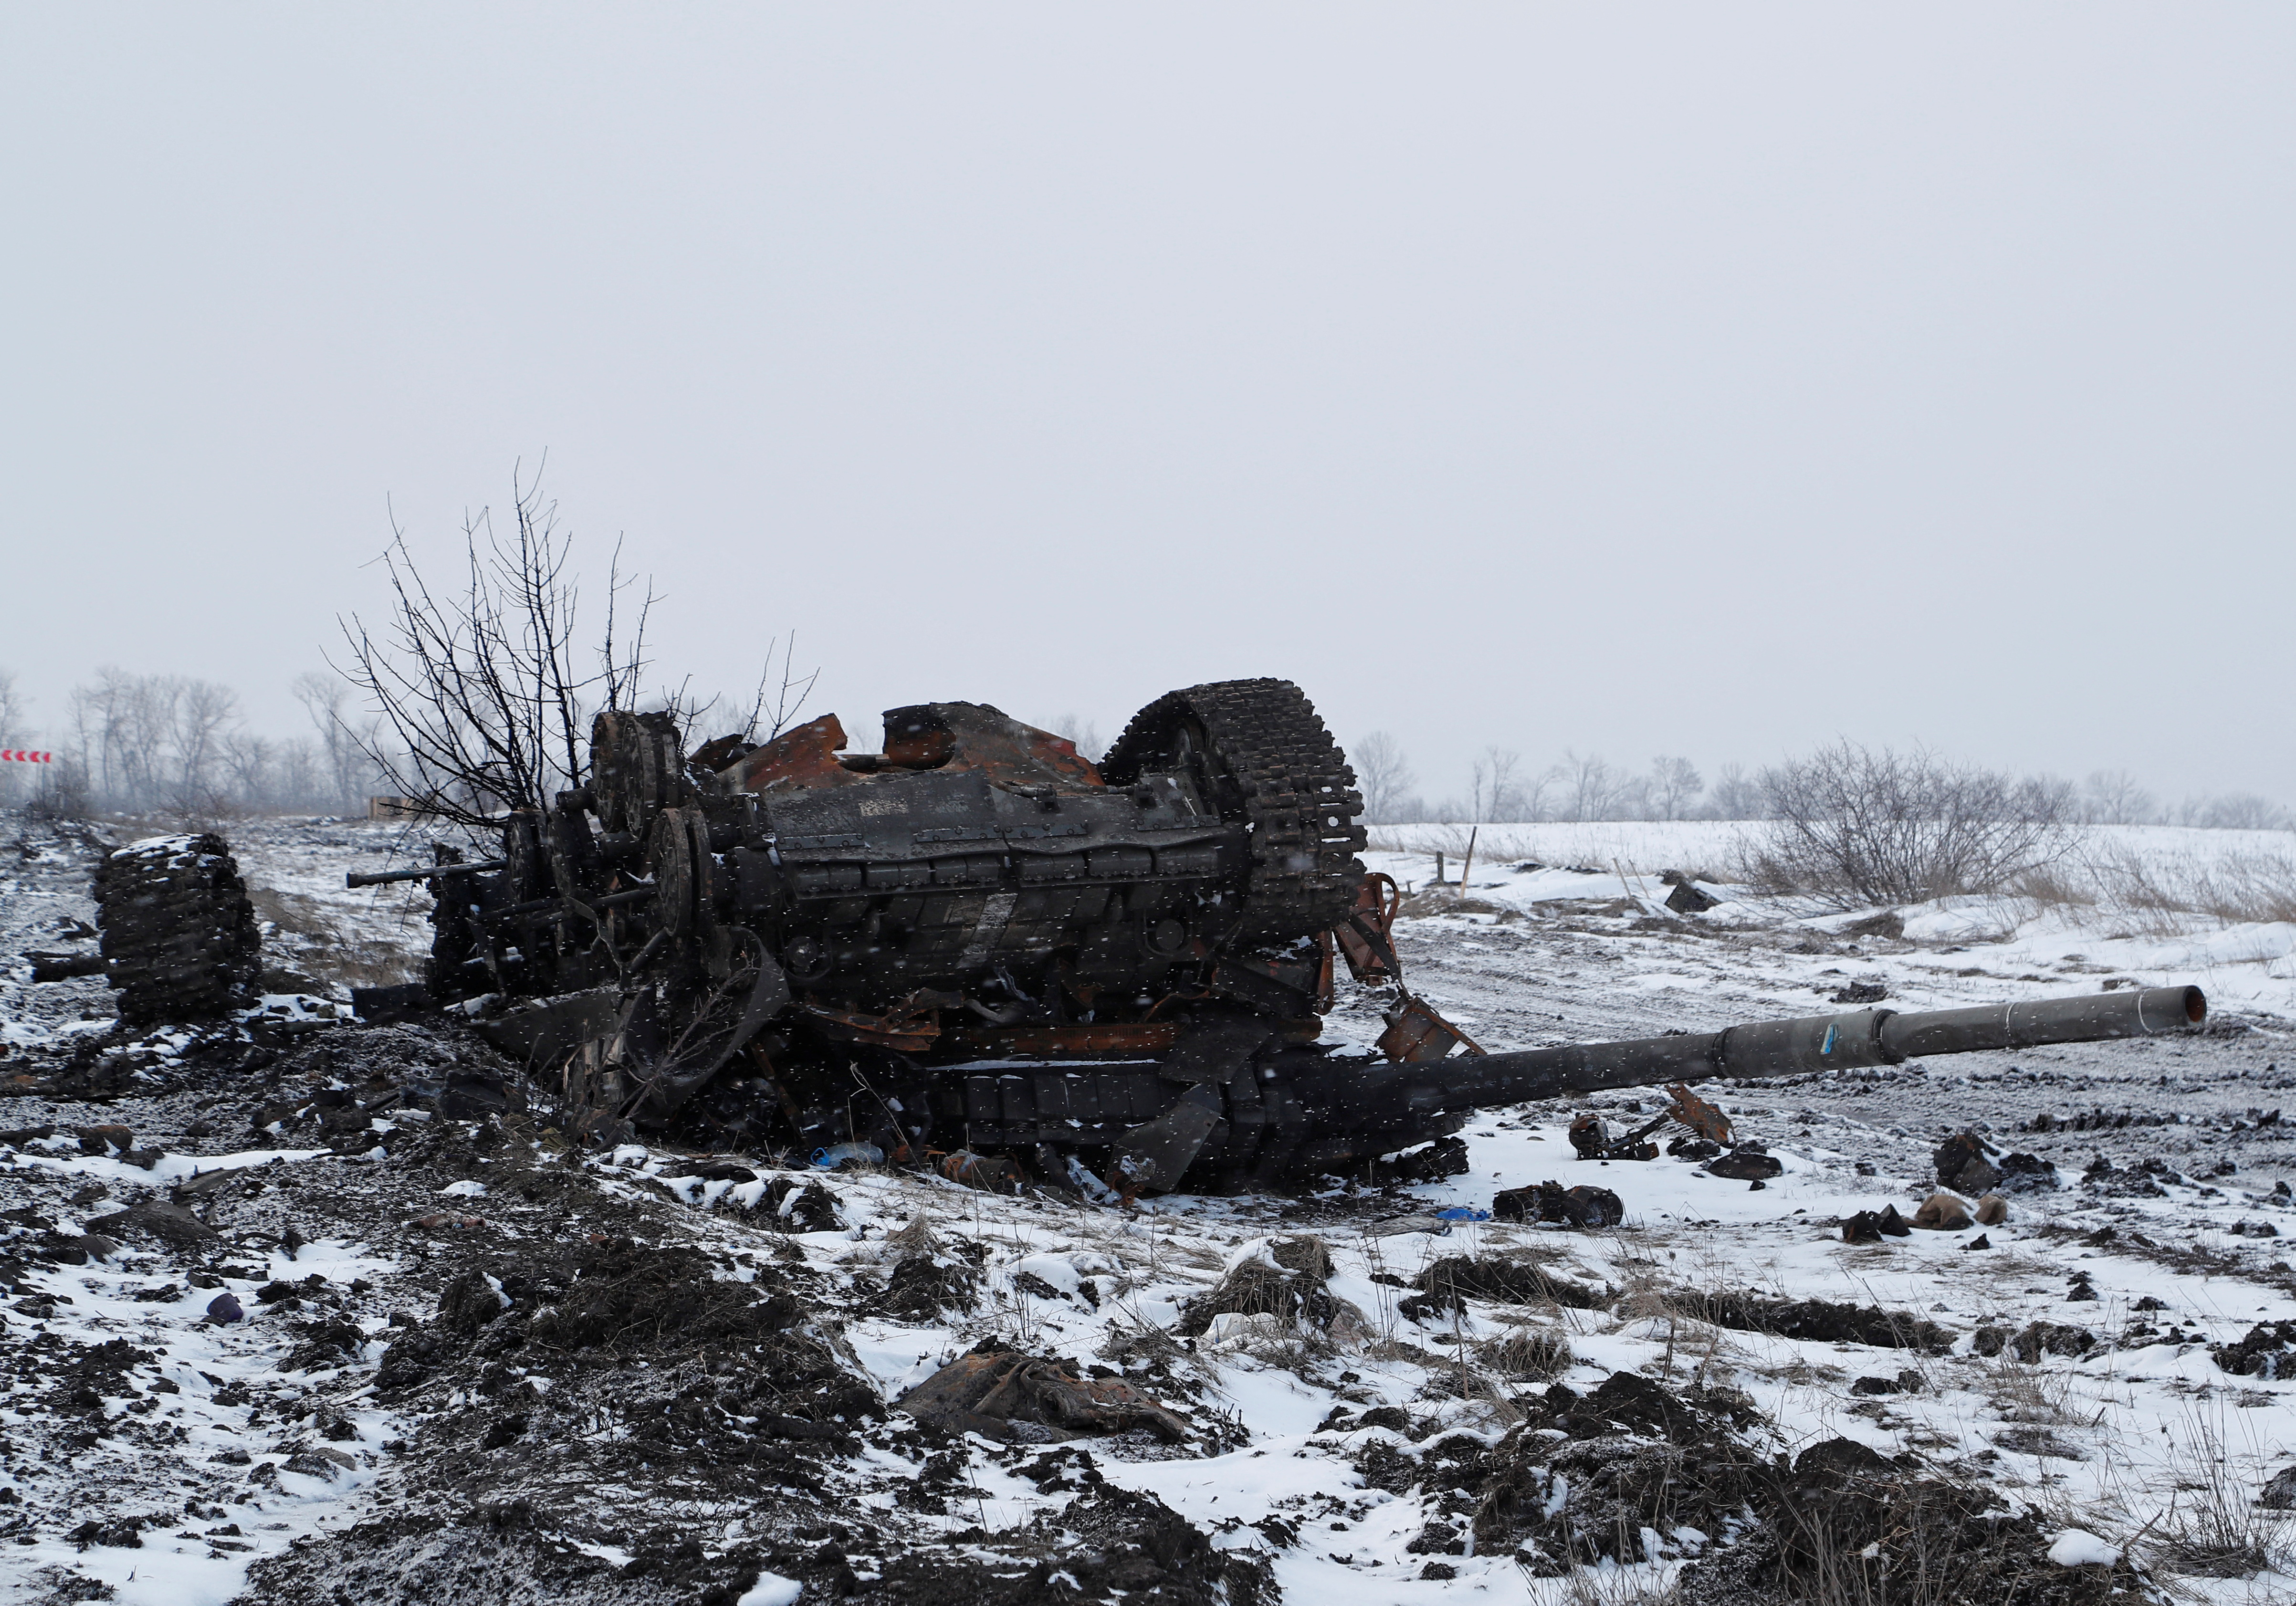 A destroyed armoured vehicle is seen in the separatist-controlled village of Anadol during Ukraine-Russia conflict in the Donetsk region